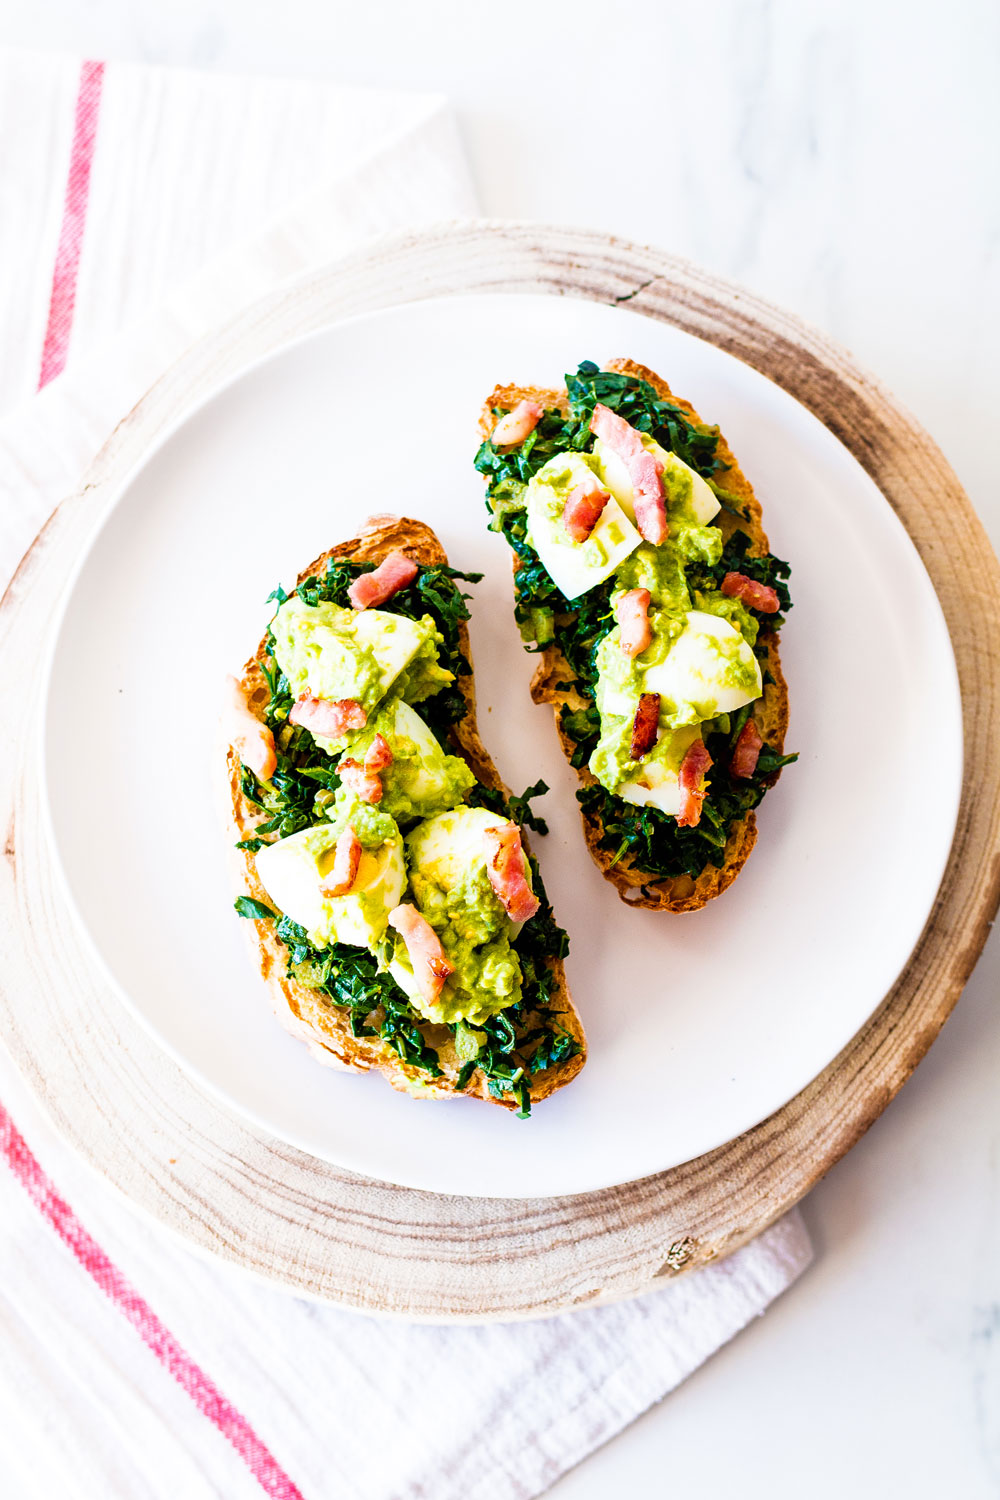 Toast is an ultra comforting food, and these yummy tostadas feature egg, bacon, avocado, and kale on crisp wholegrain toasts. https://www.spotebi.com/recipes/egg-bacon-avocado-tostadas/